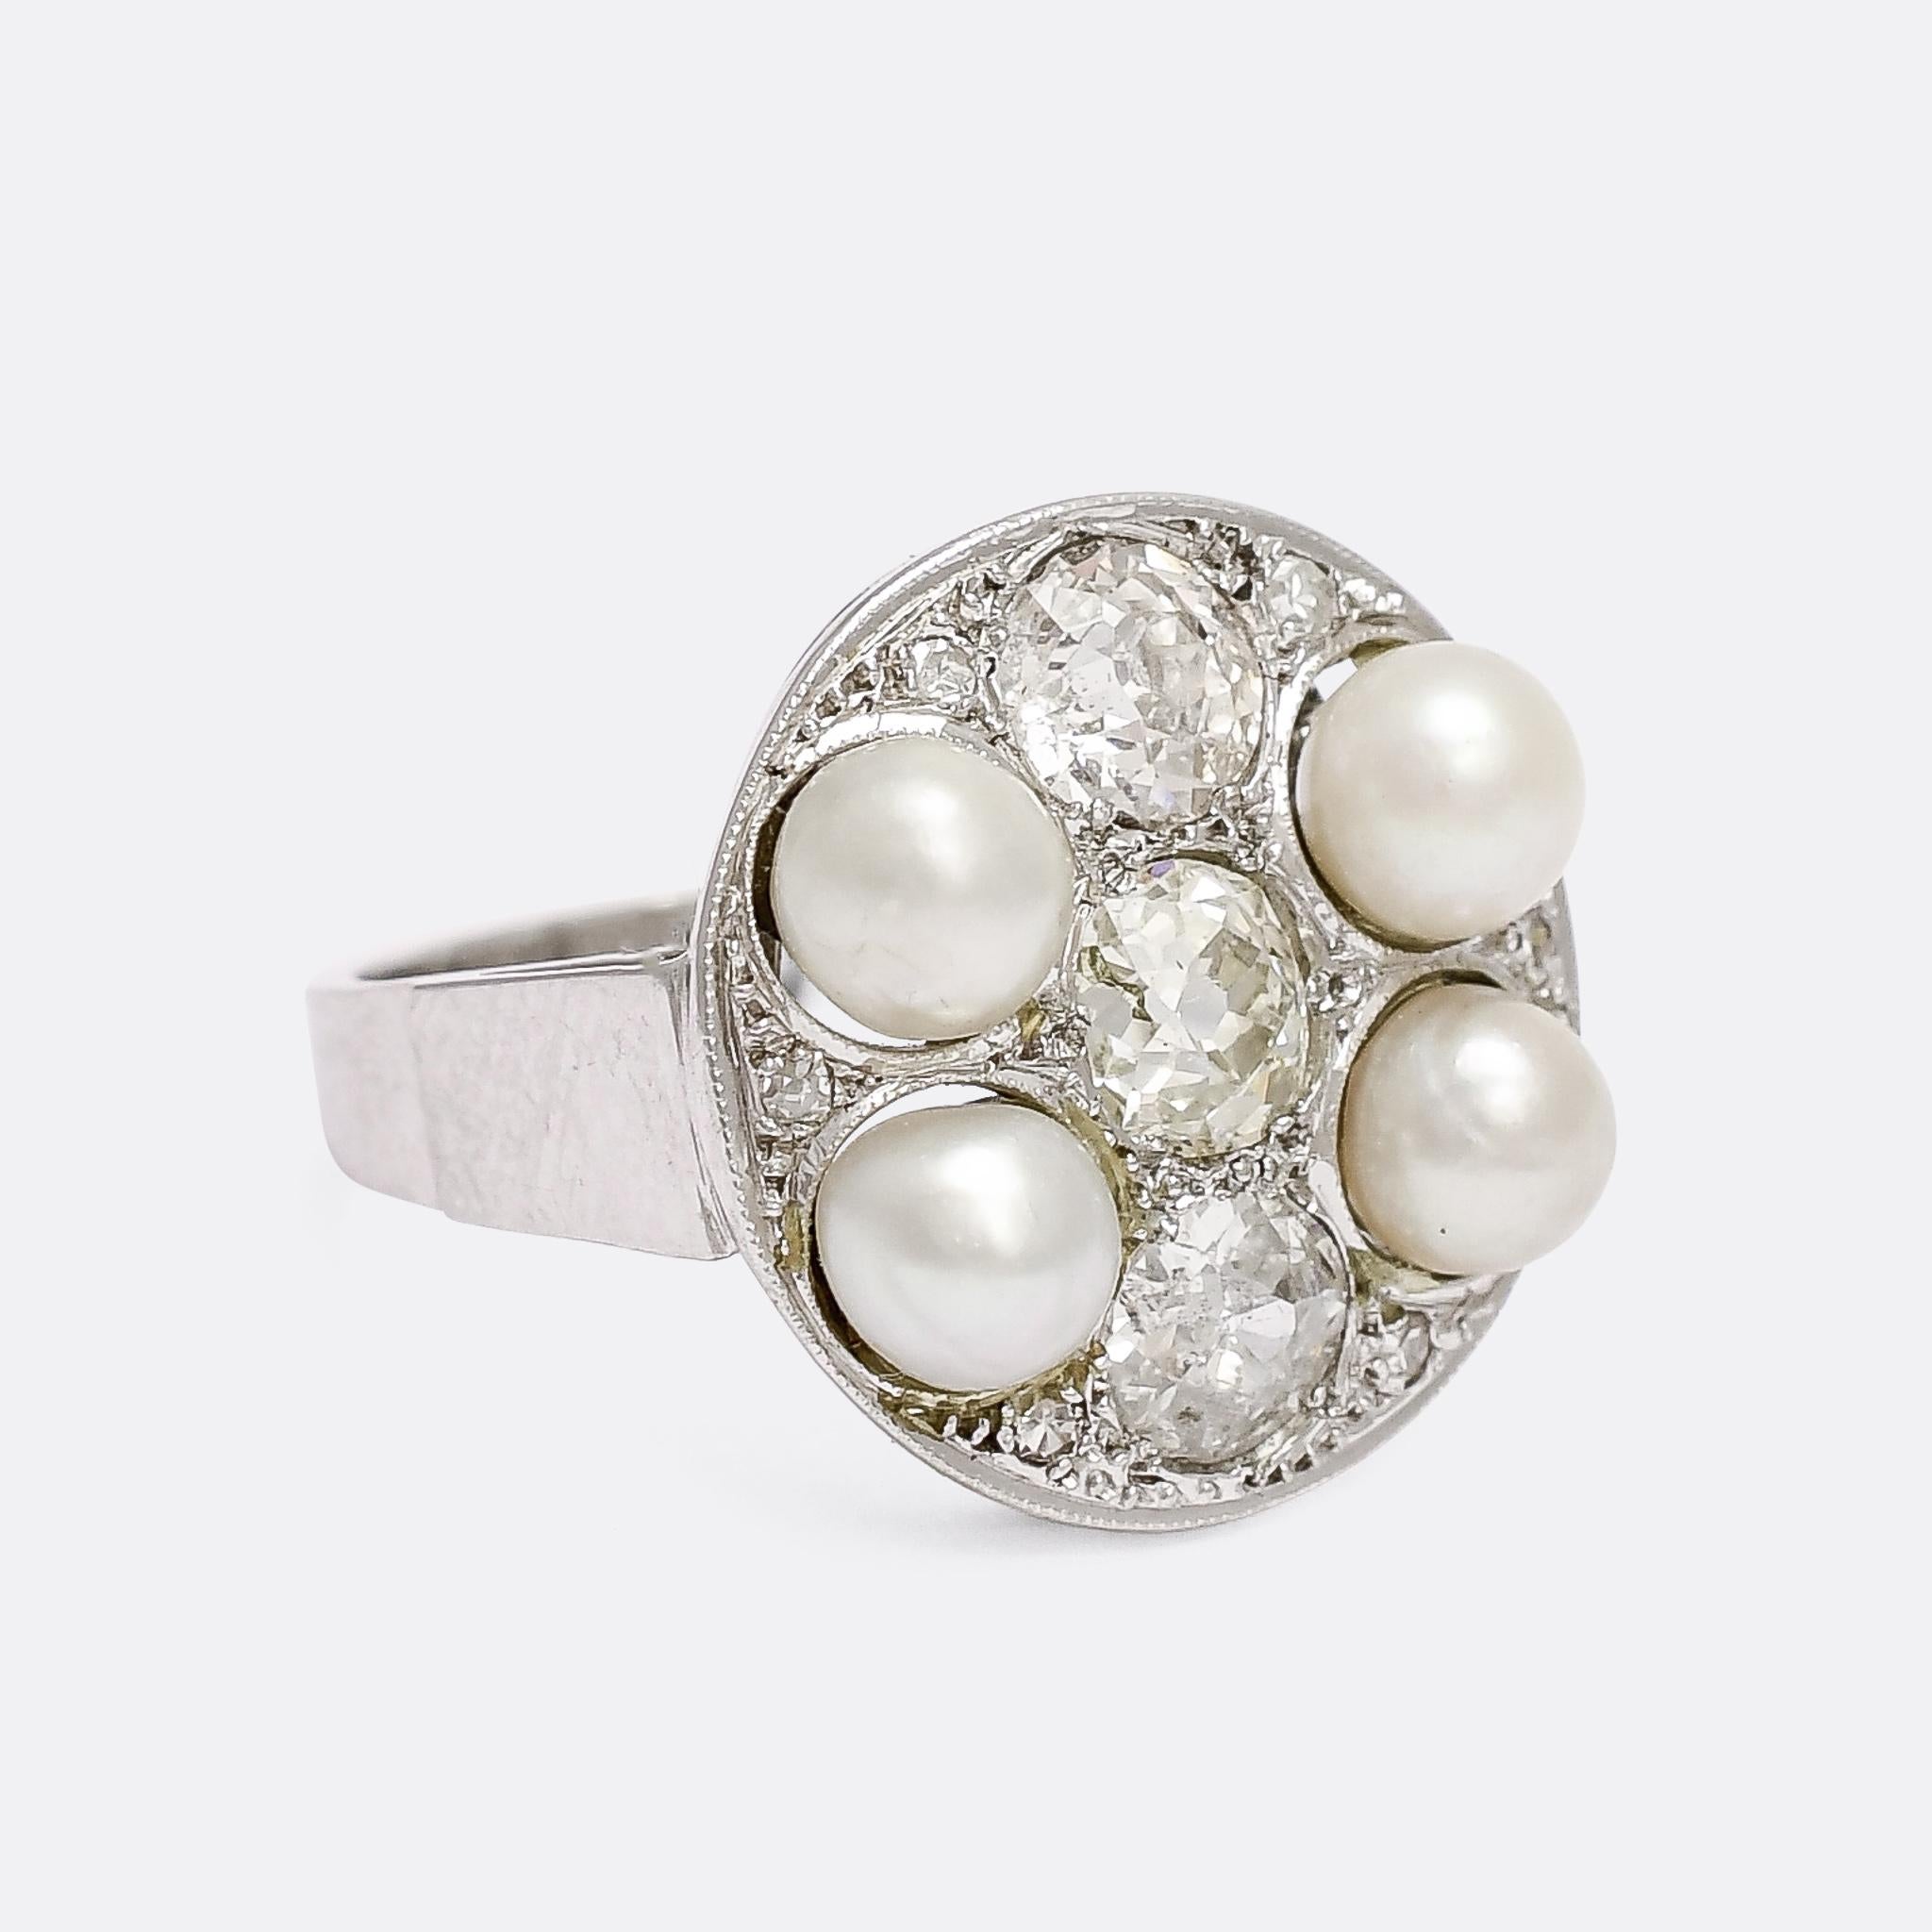 A spectacular mid-Century modern cocktail ring dating from the 1940s. It's set with seven primary stones: four natural pearls and three 3/4 carat old mine cut diamonds. The stones are set in finely millegrained platinum on a round, dish-like face,